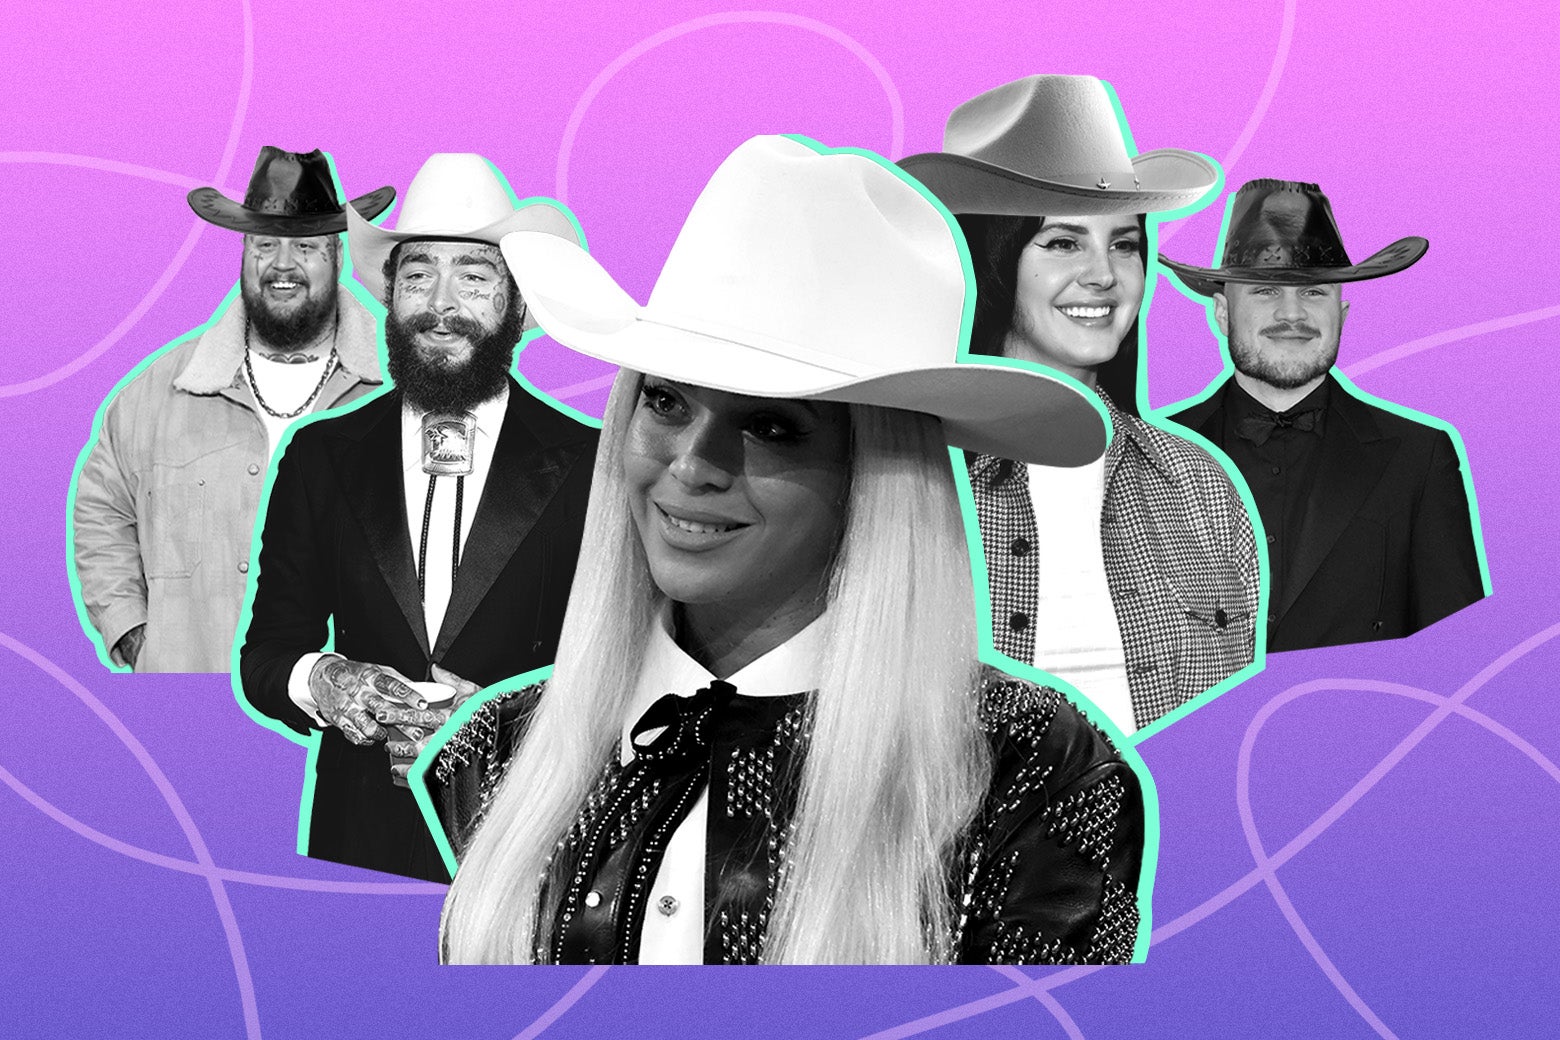 Collage of recent country stars, including Jelly Roll, Post Malone, Beyoncé, Lana Del Rey, and Zach Bryan.